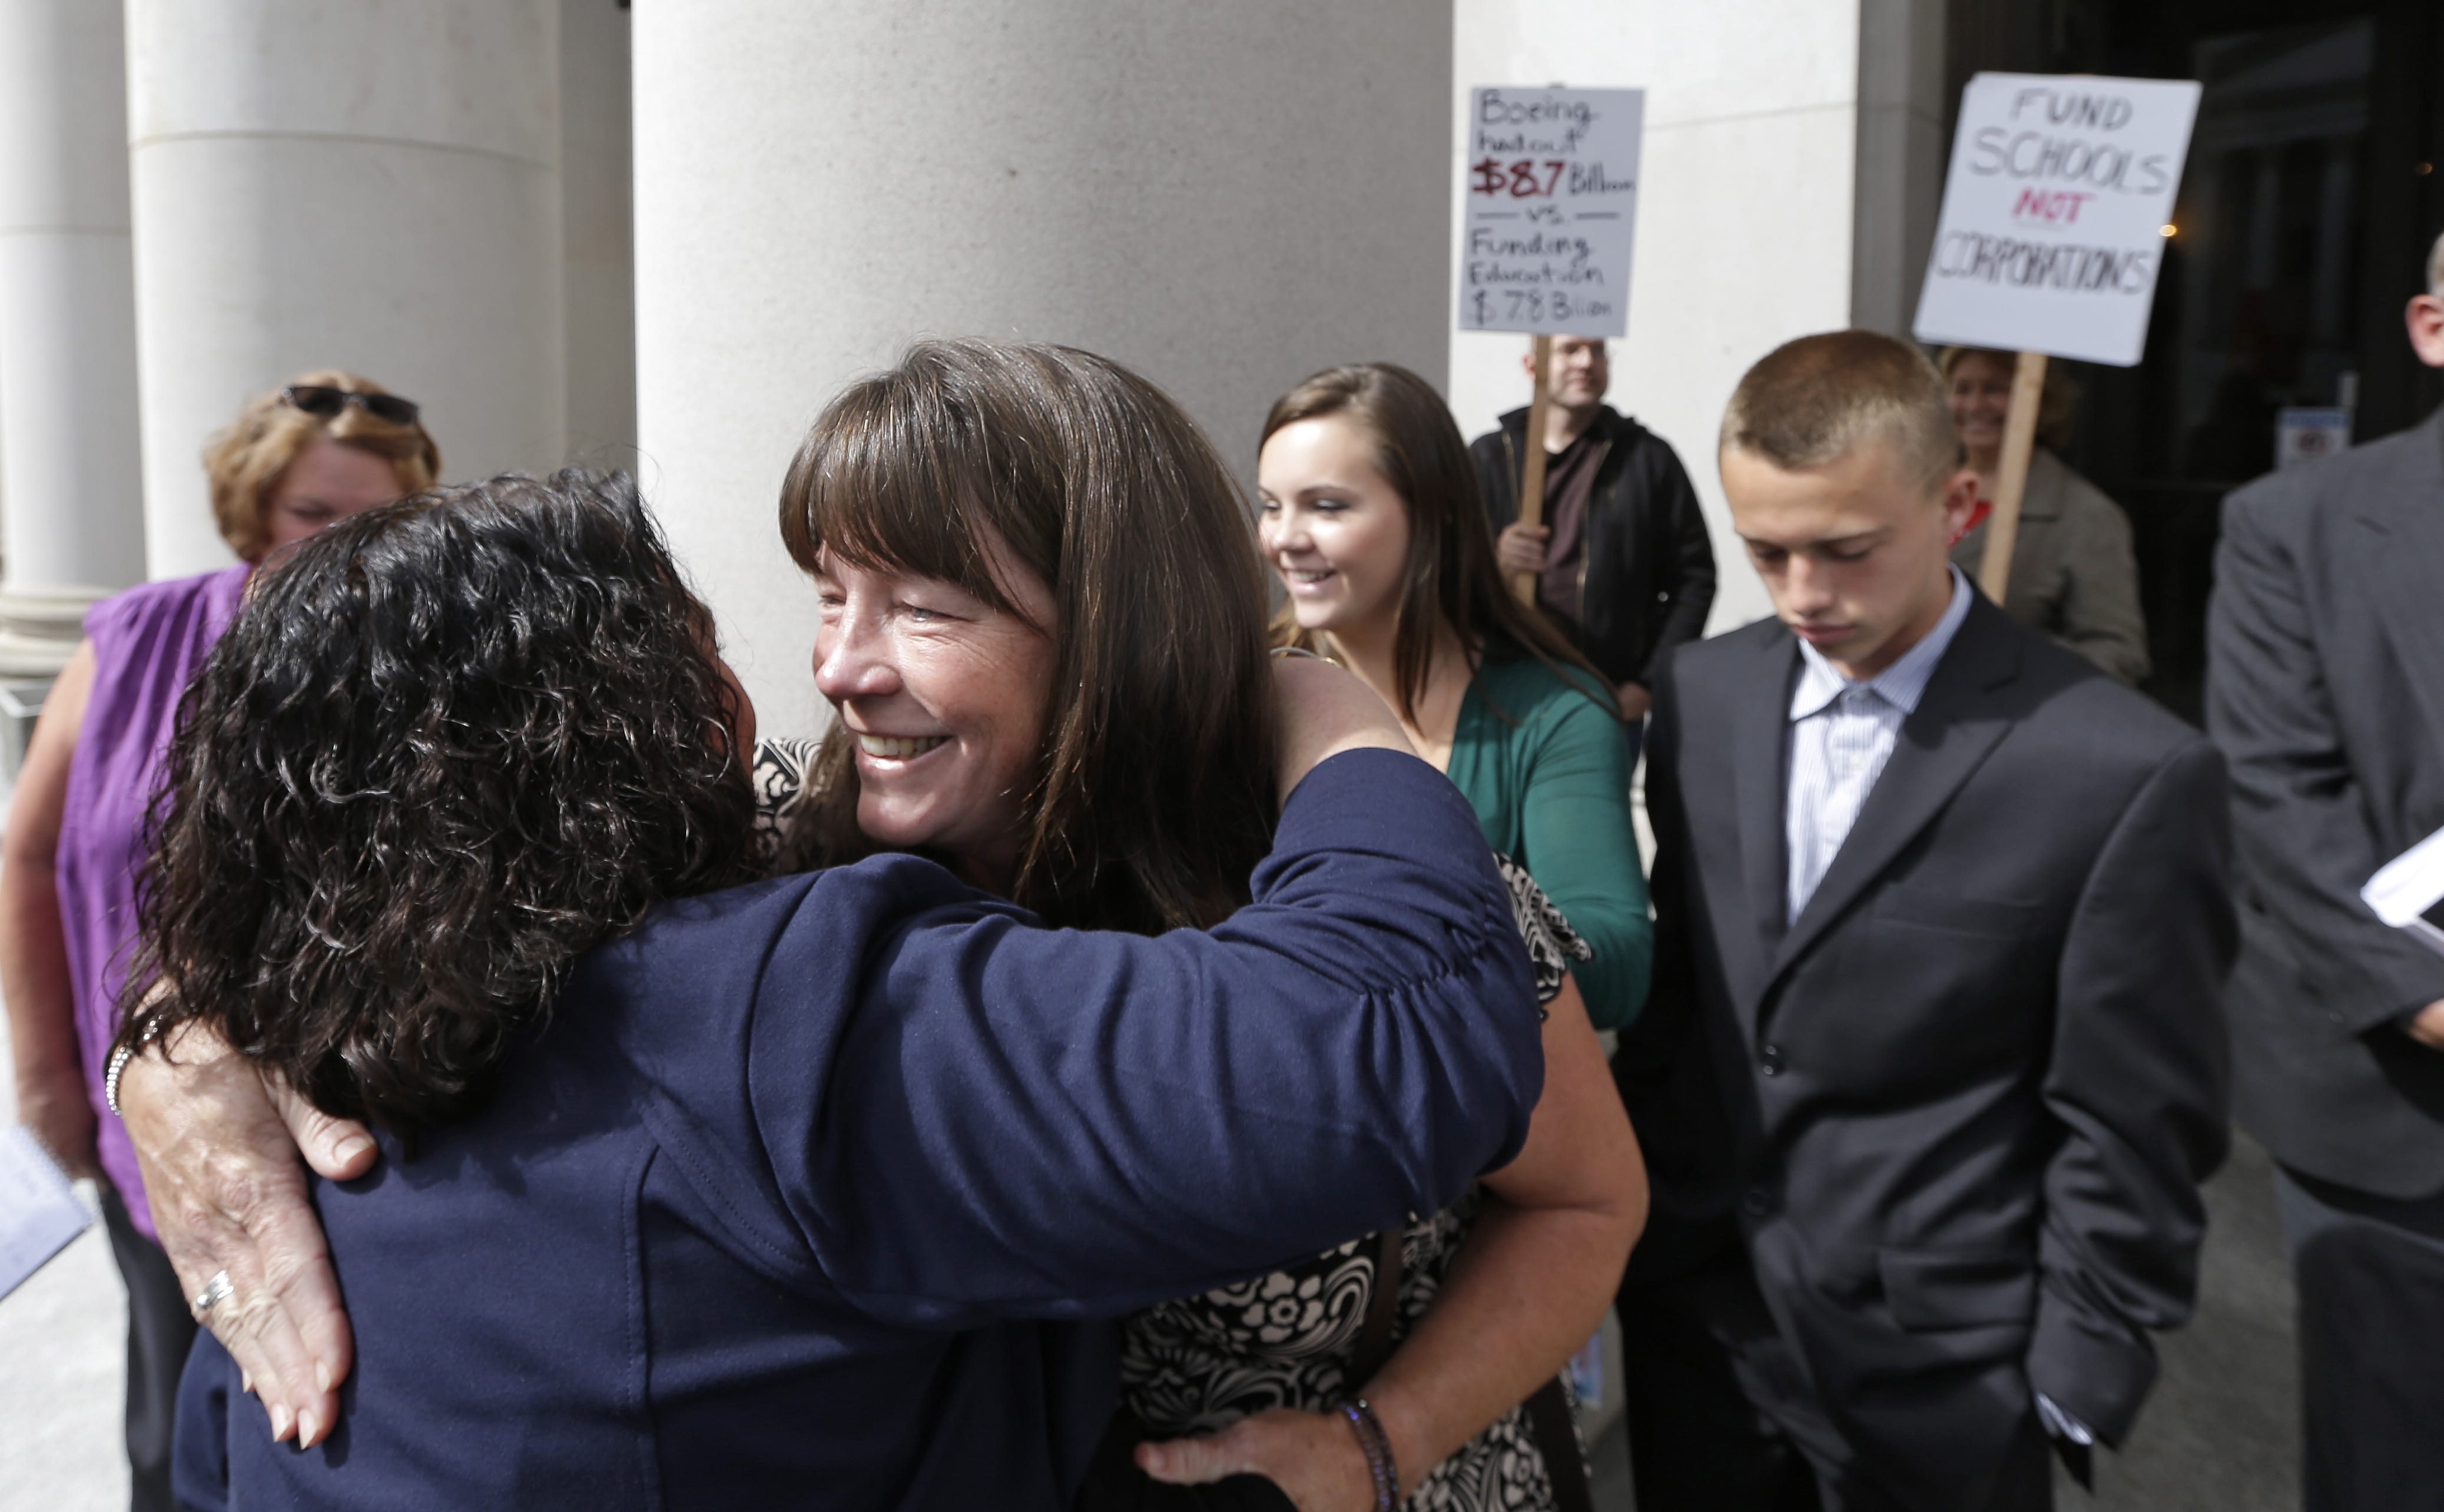 Plaintiff Stephanie McCleary, with her children Kelsey, 20, and Carter, 15, right, behind, is embraced outside following a Sept. 3 hearing before the state Supreme Court in Olympia.